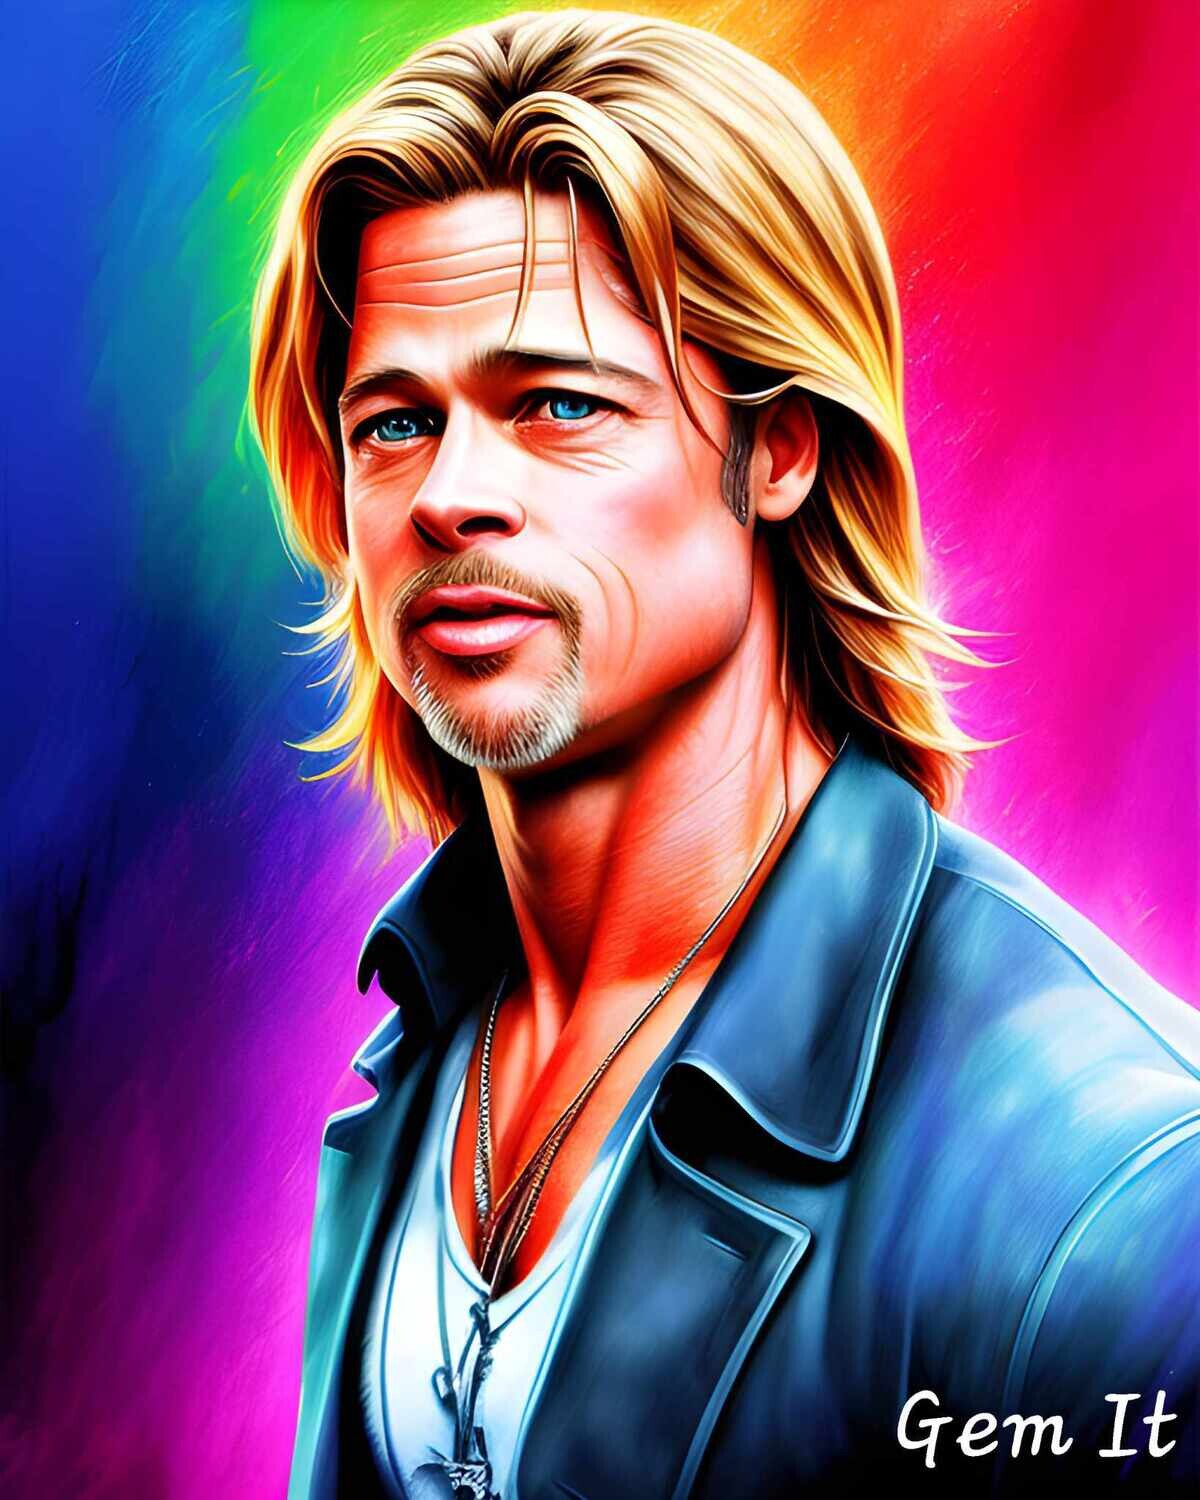 Brad Pitt 2 - Specially ordered for you. Delivery is approximately 4 - 6 weeks.